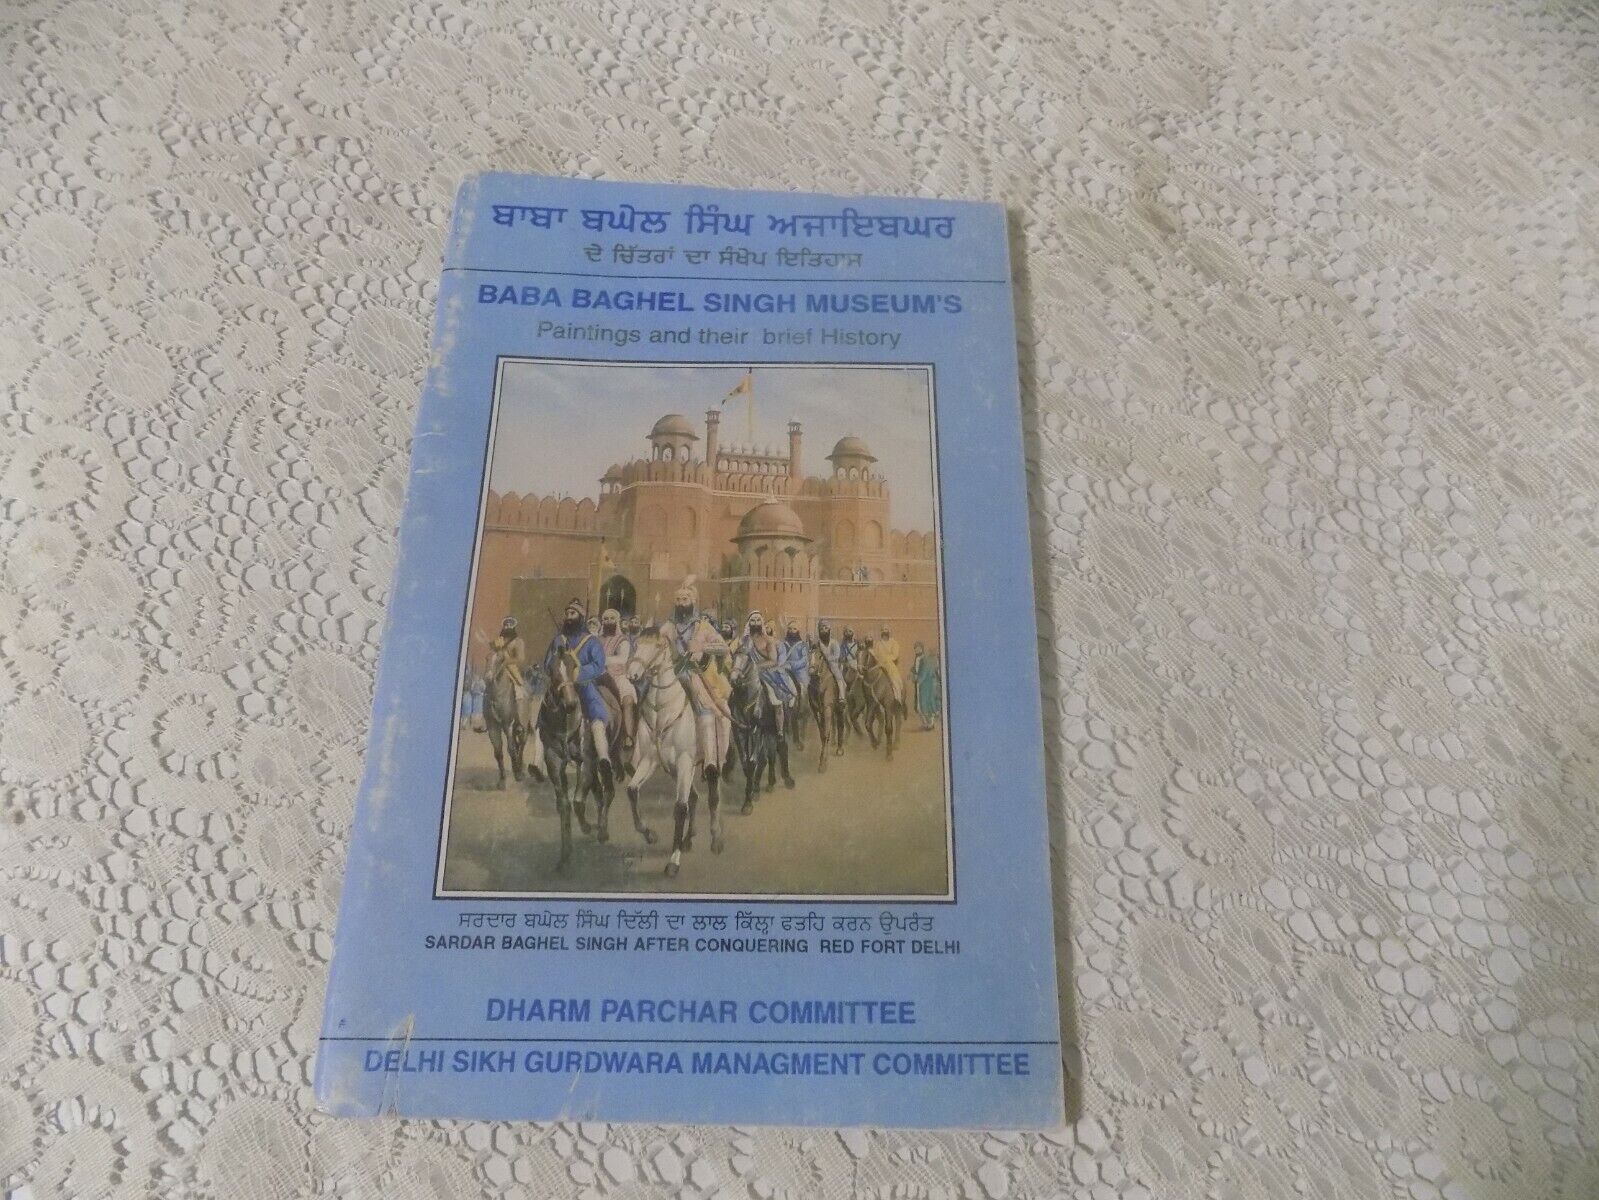 Baba Baghel Singh Museum's Paintings And Their Brief History. 1998. 64p